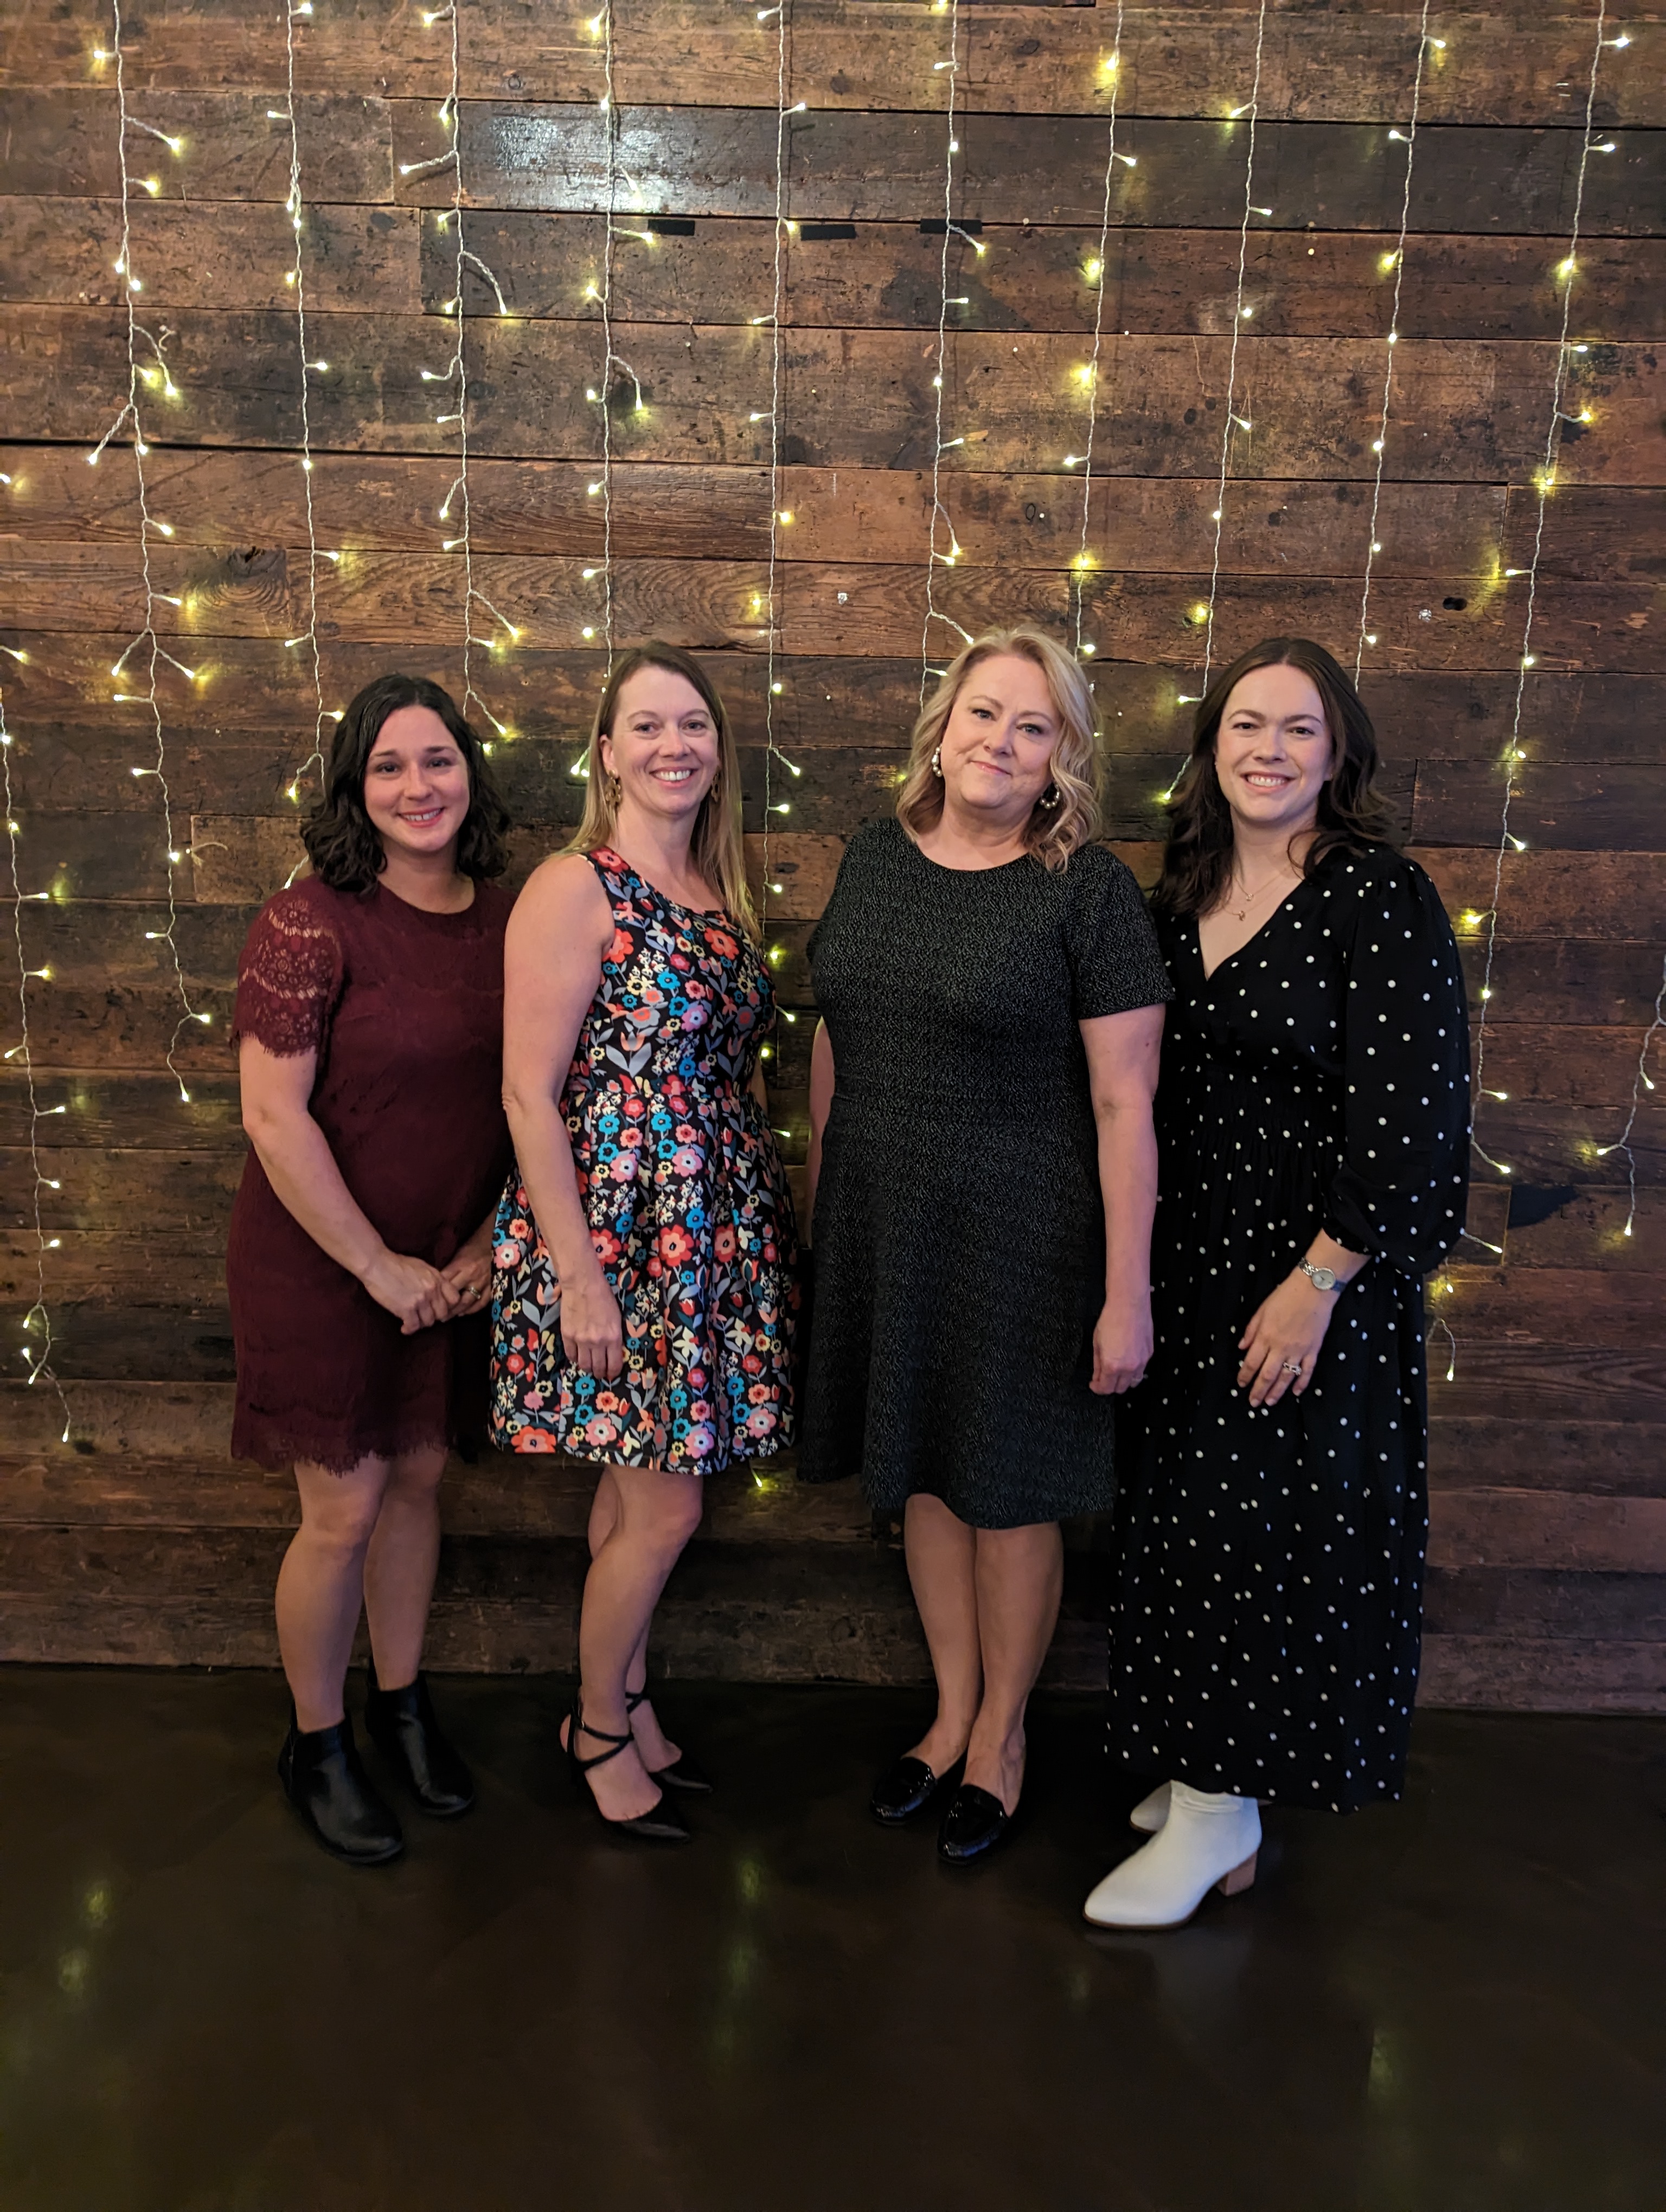 Meet Your Michigan-NW Ohio Chapter Team! From left to right, Valerie Phelps, Abbie Stoppa, Shelly Francis and Mariel Bouza